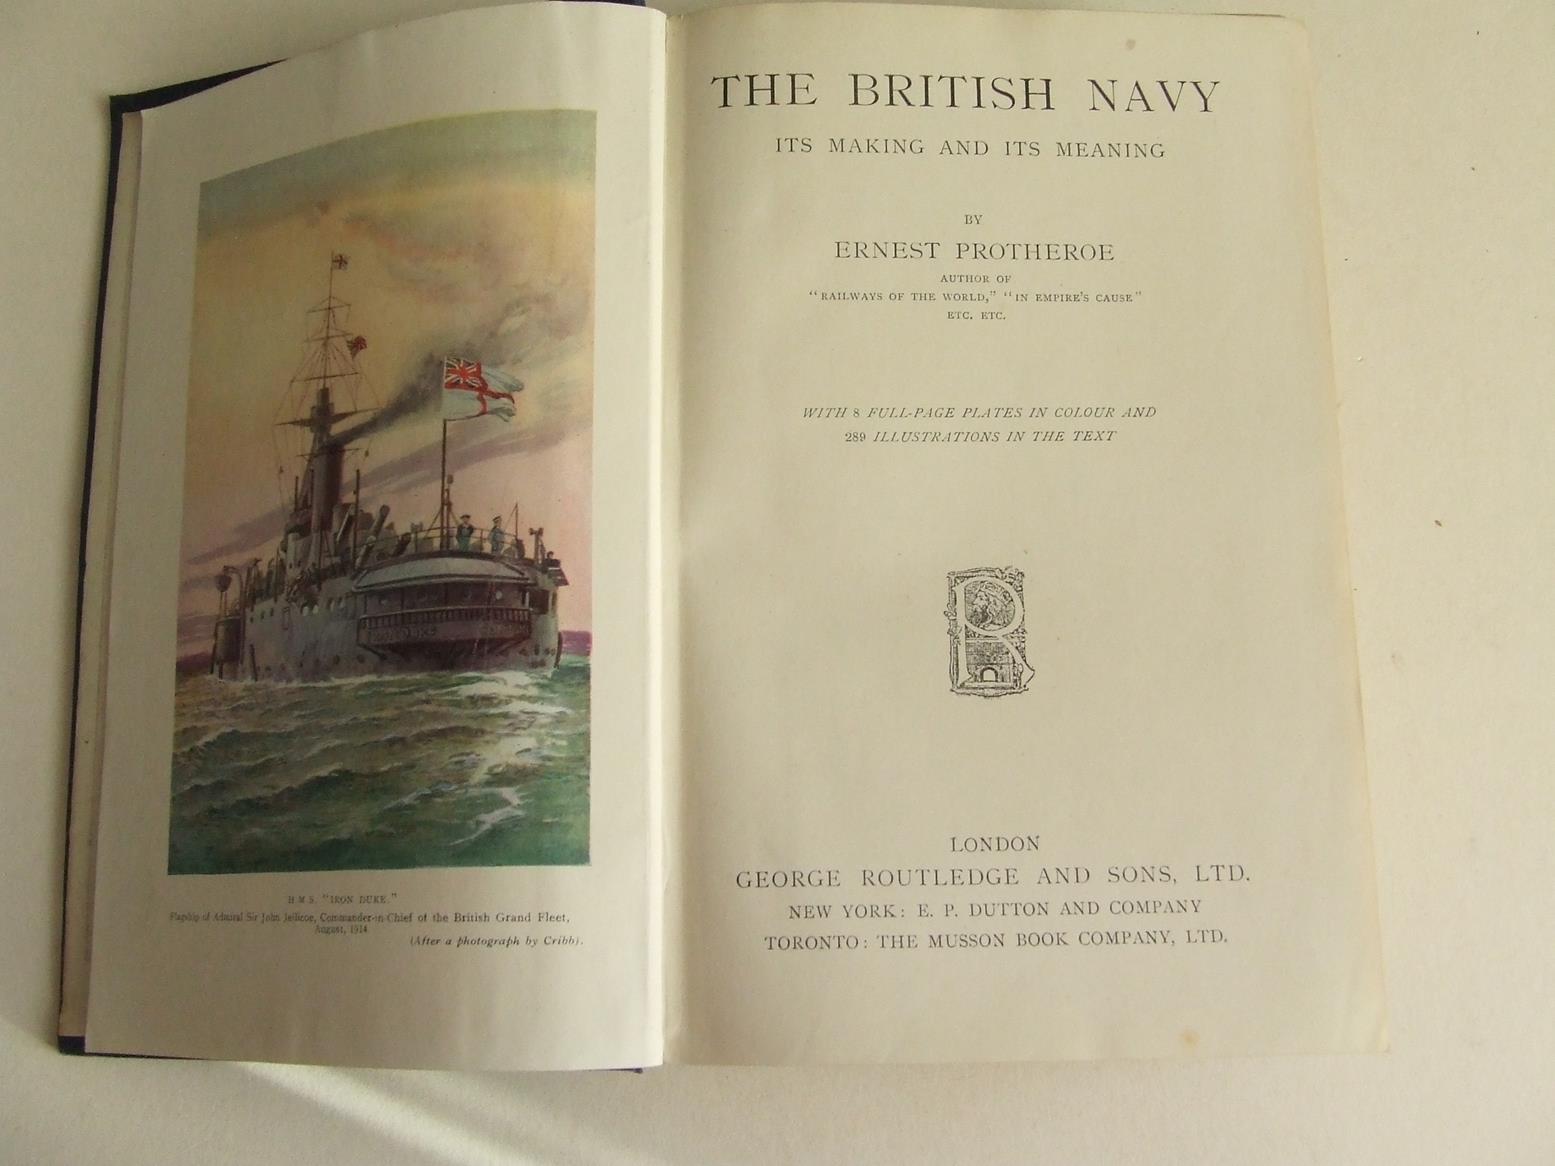 The British Navy, its making and its meaning